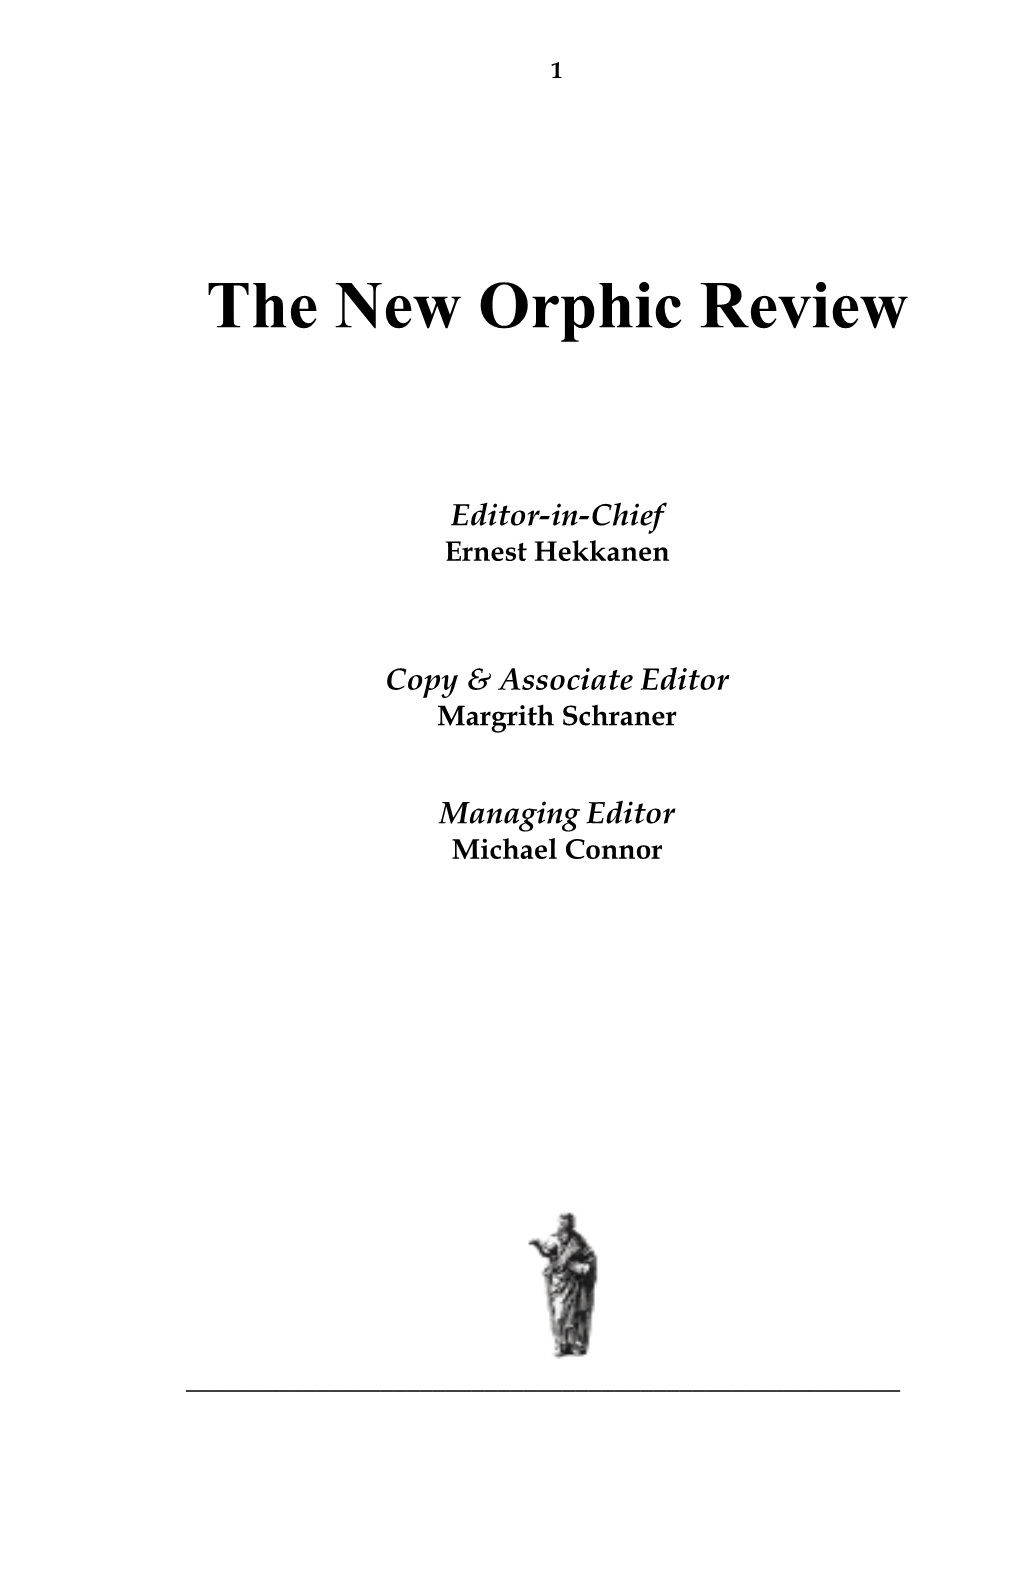 The New Orphic Review